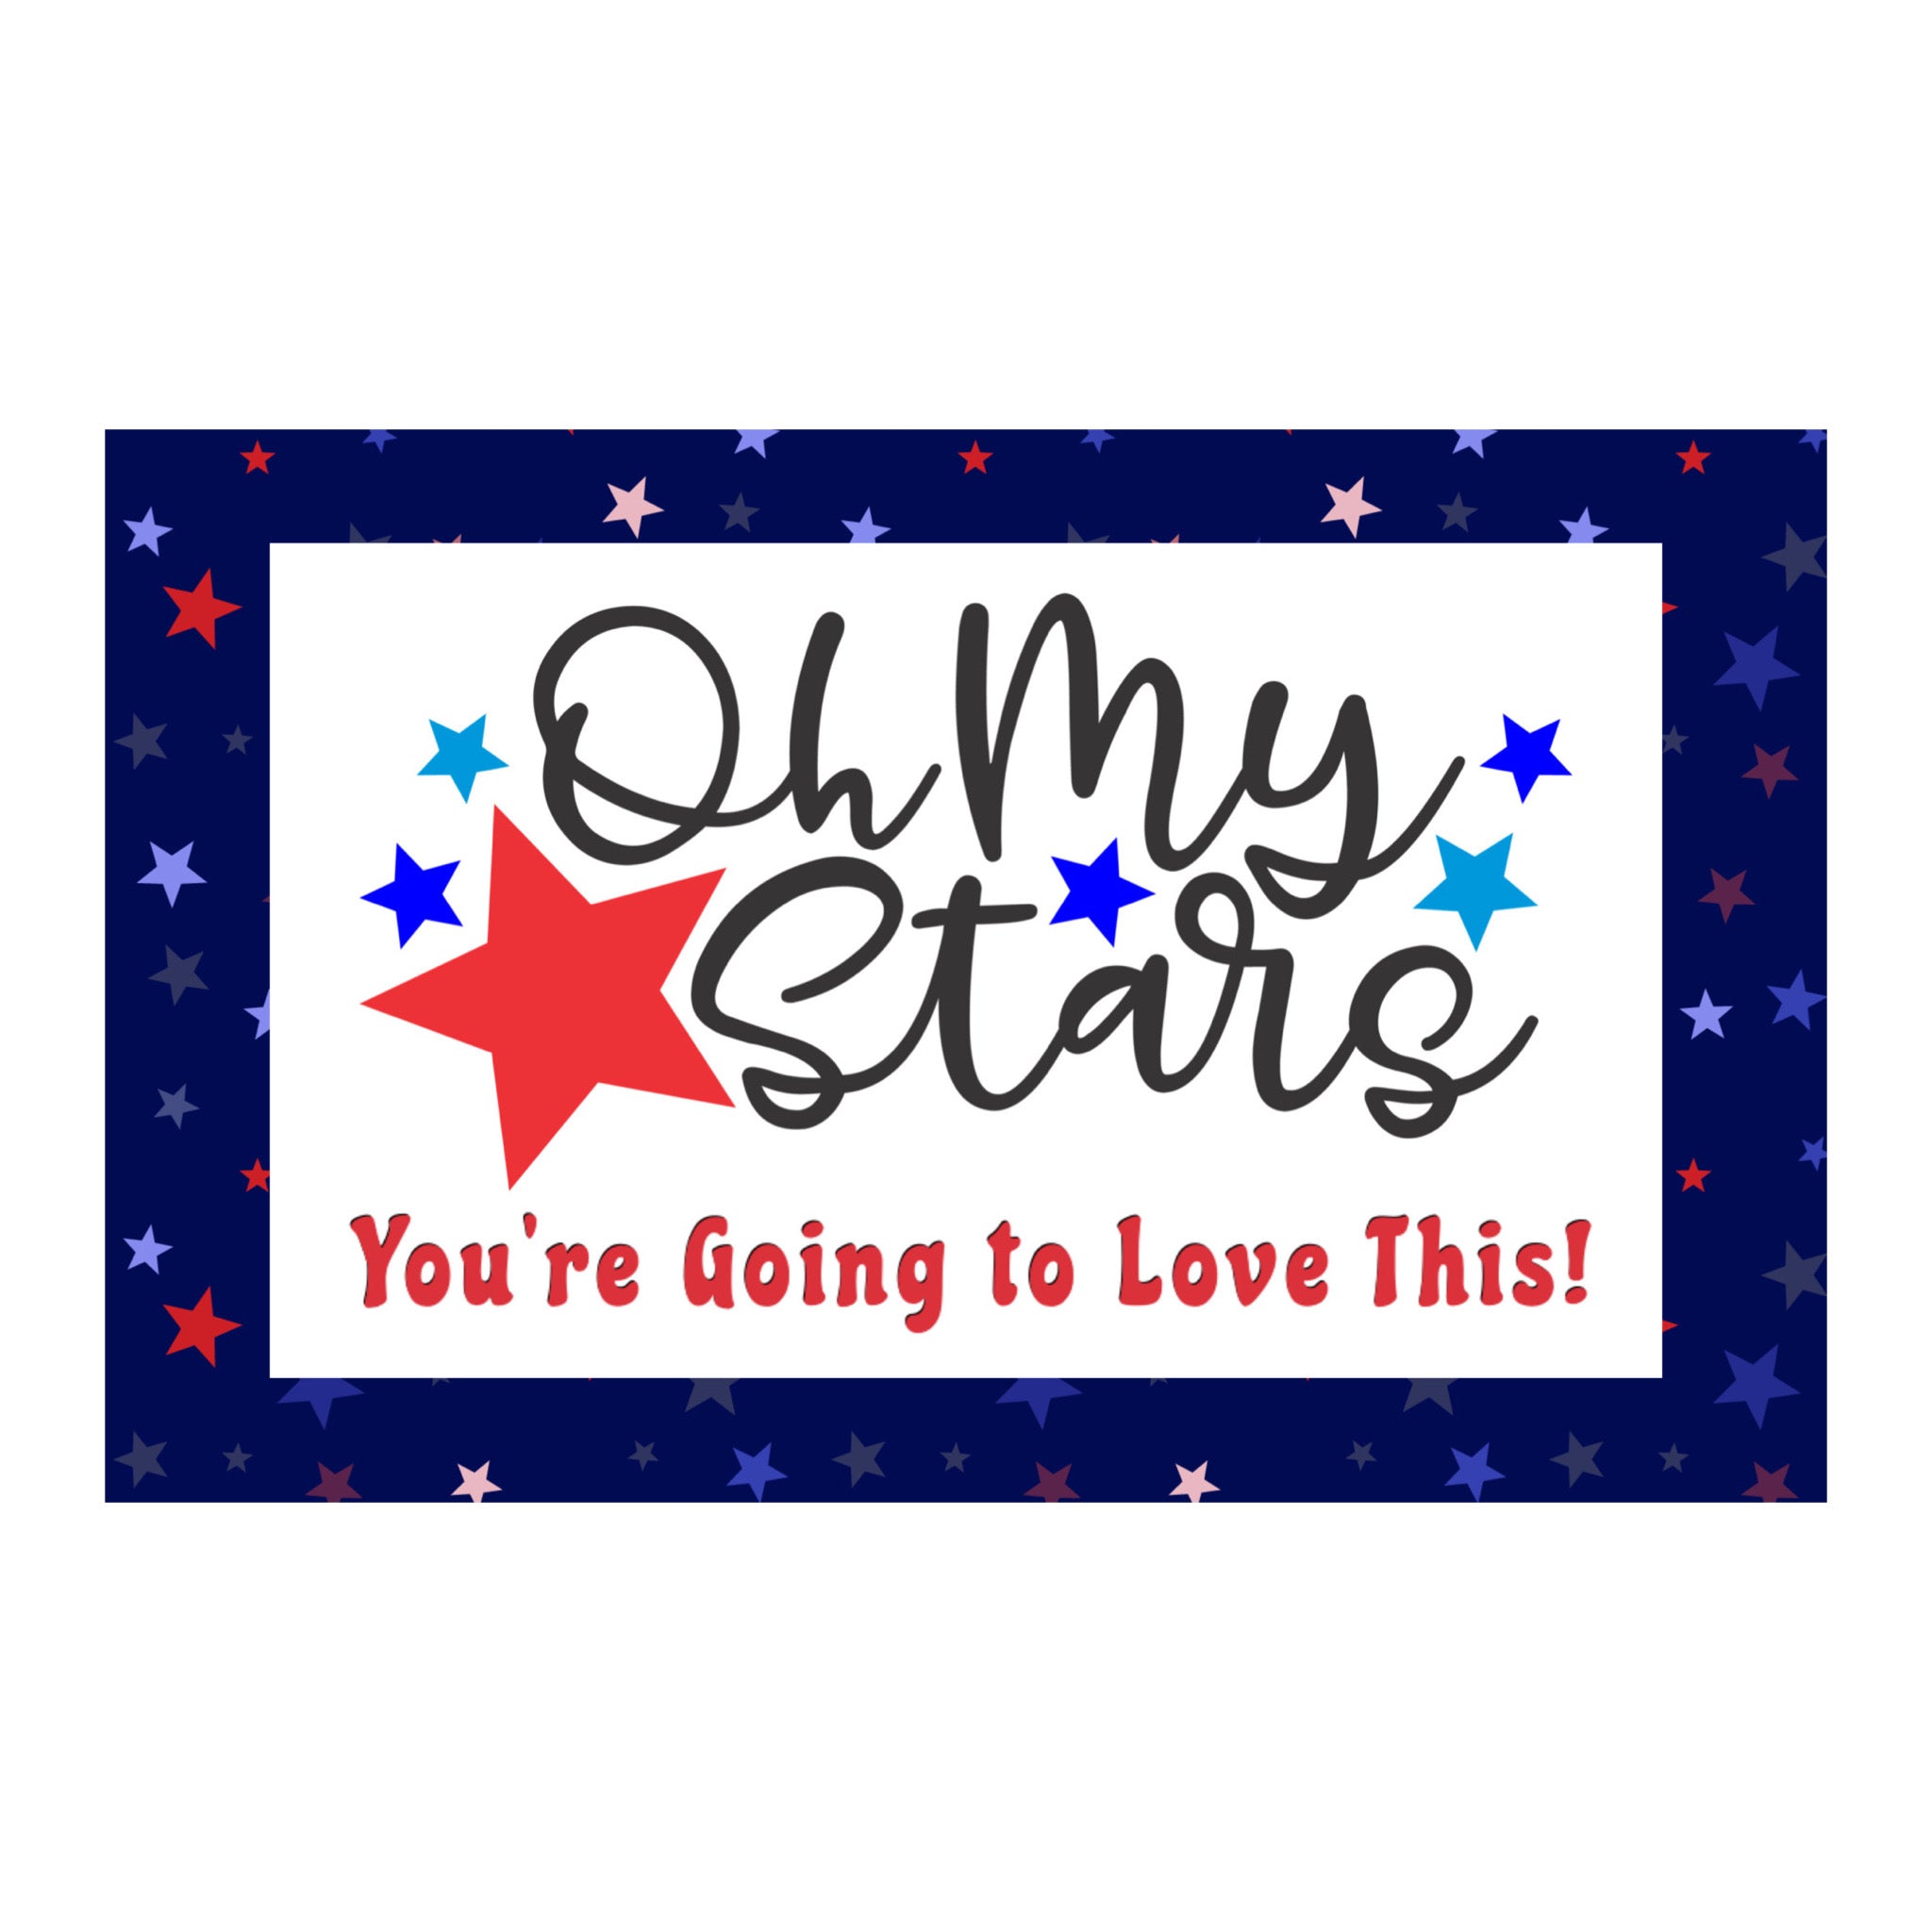 TGD Exclusive! Oh My Stars! You're Going to Love This! 1.5x2.5 Square Stickers, 25 stickers per pack